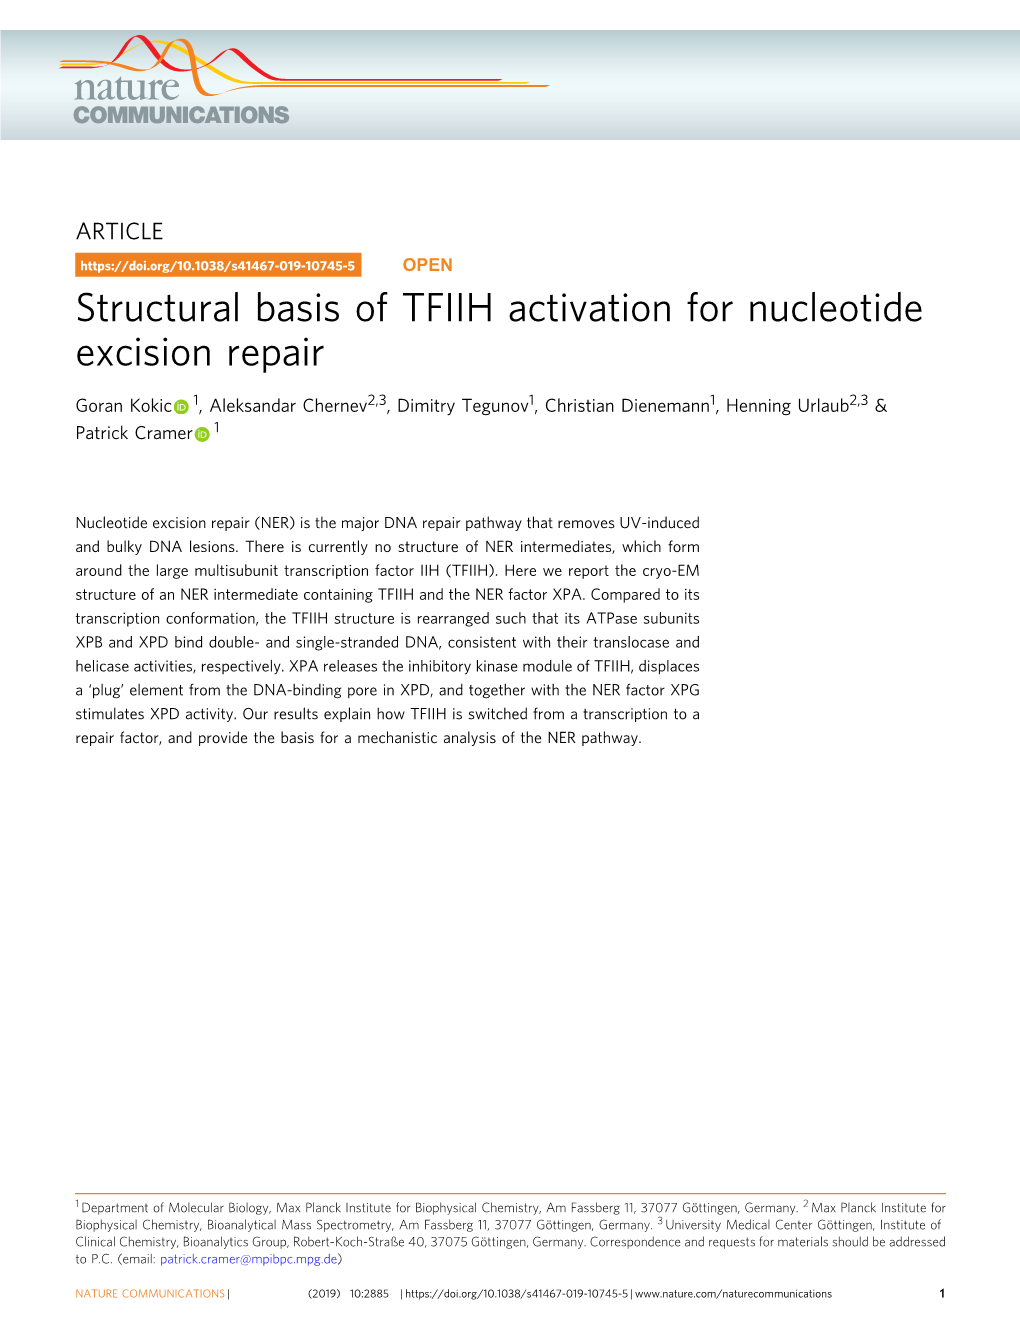 Structural Basis of TFIIH Activation for Nucleotide Excision Repair